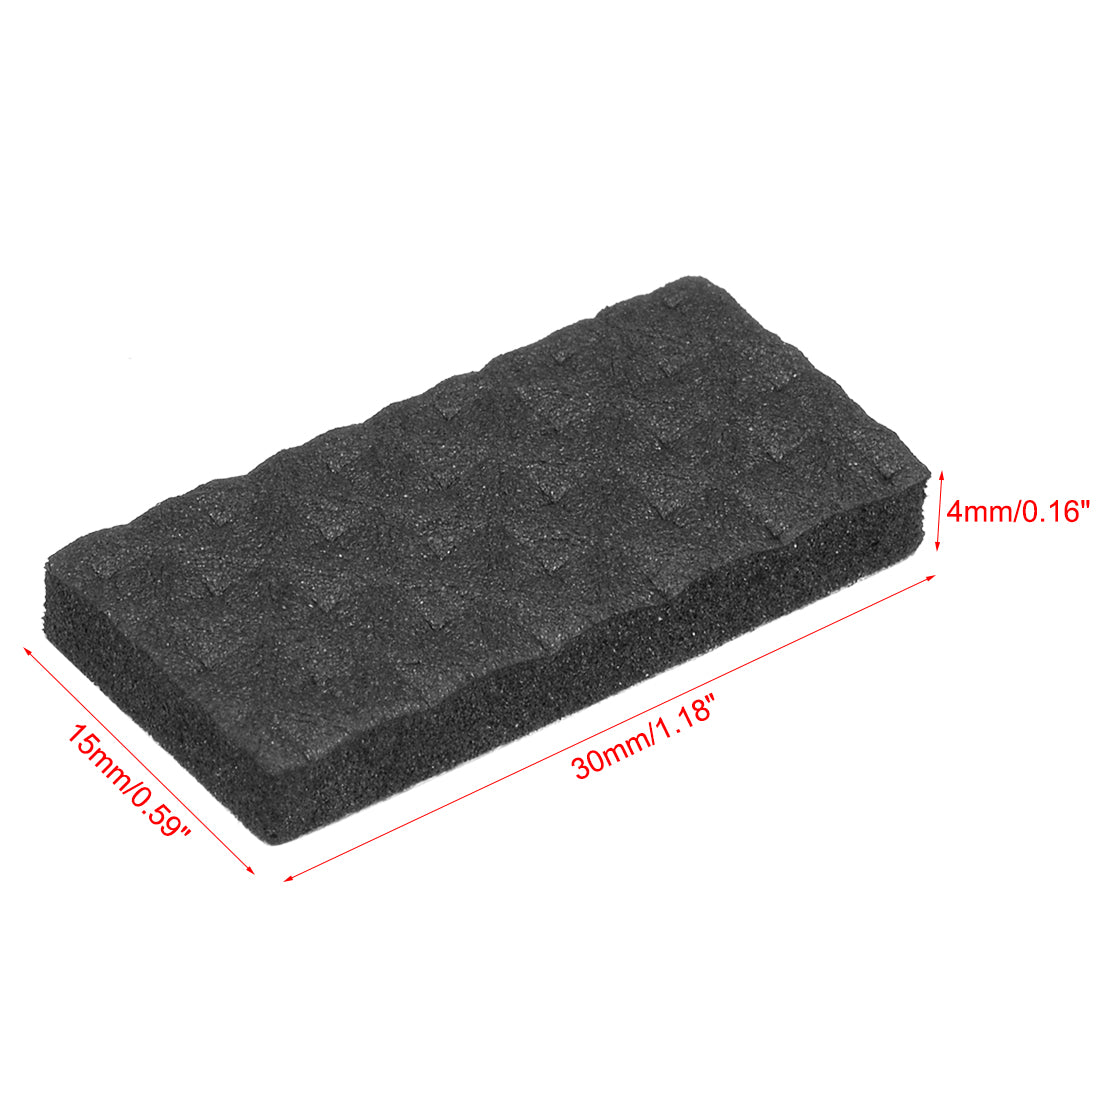 uxcell Uxcell Furniture Pads Adhesive EVA Pads 30mm x 15mm Black 28Pcs